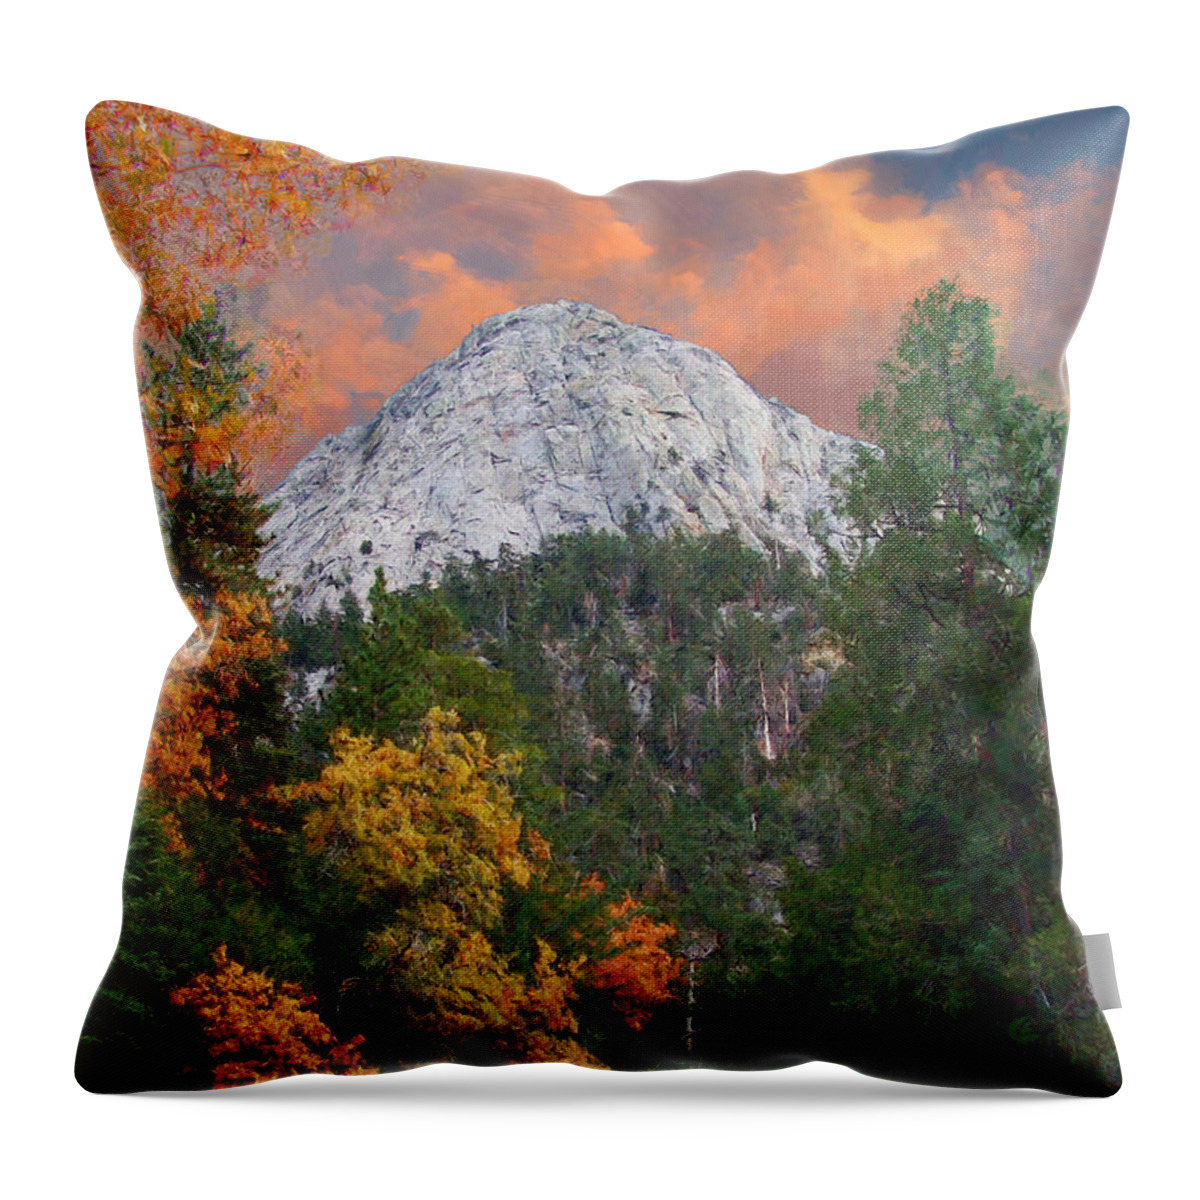 Tahquitz Peak Throw Pillow featuring the digital art Tahquitz Peak - Lily Rock Painted Version by Glenn McCarthy Art and Photography